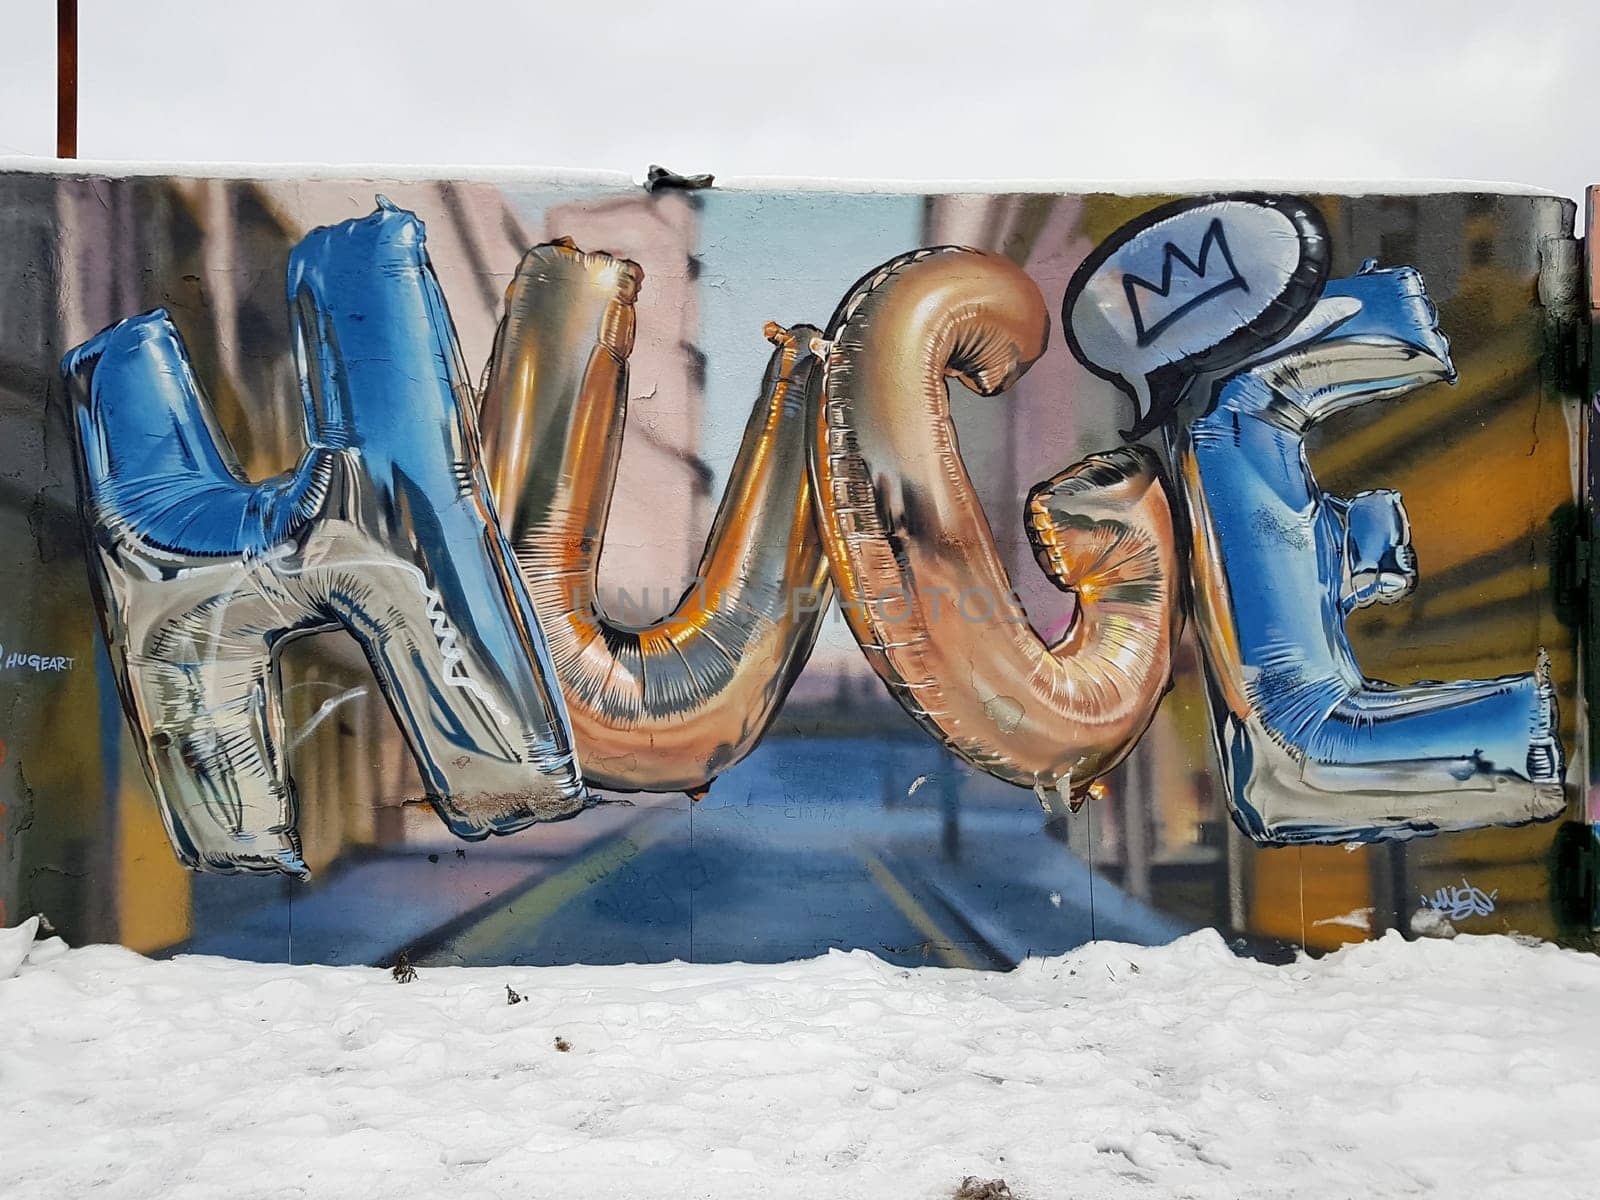 Stockholm, Sweden, January 01 2024. Graffiti exhibition on the outskirts of the city. by Jamaladeen